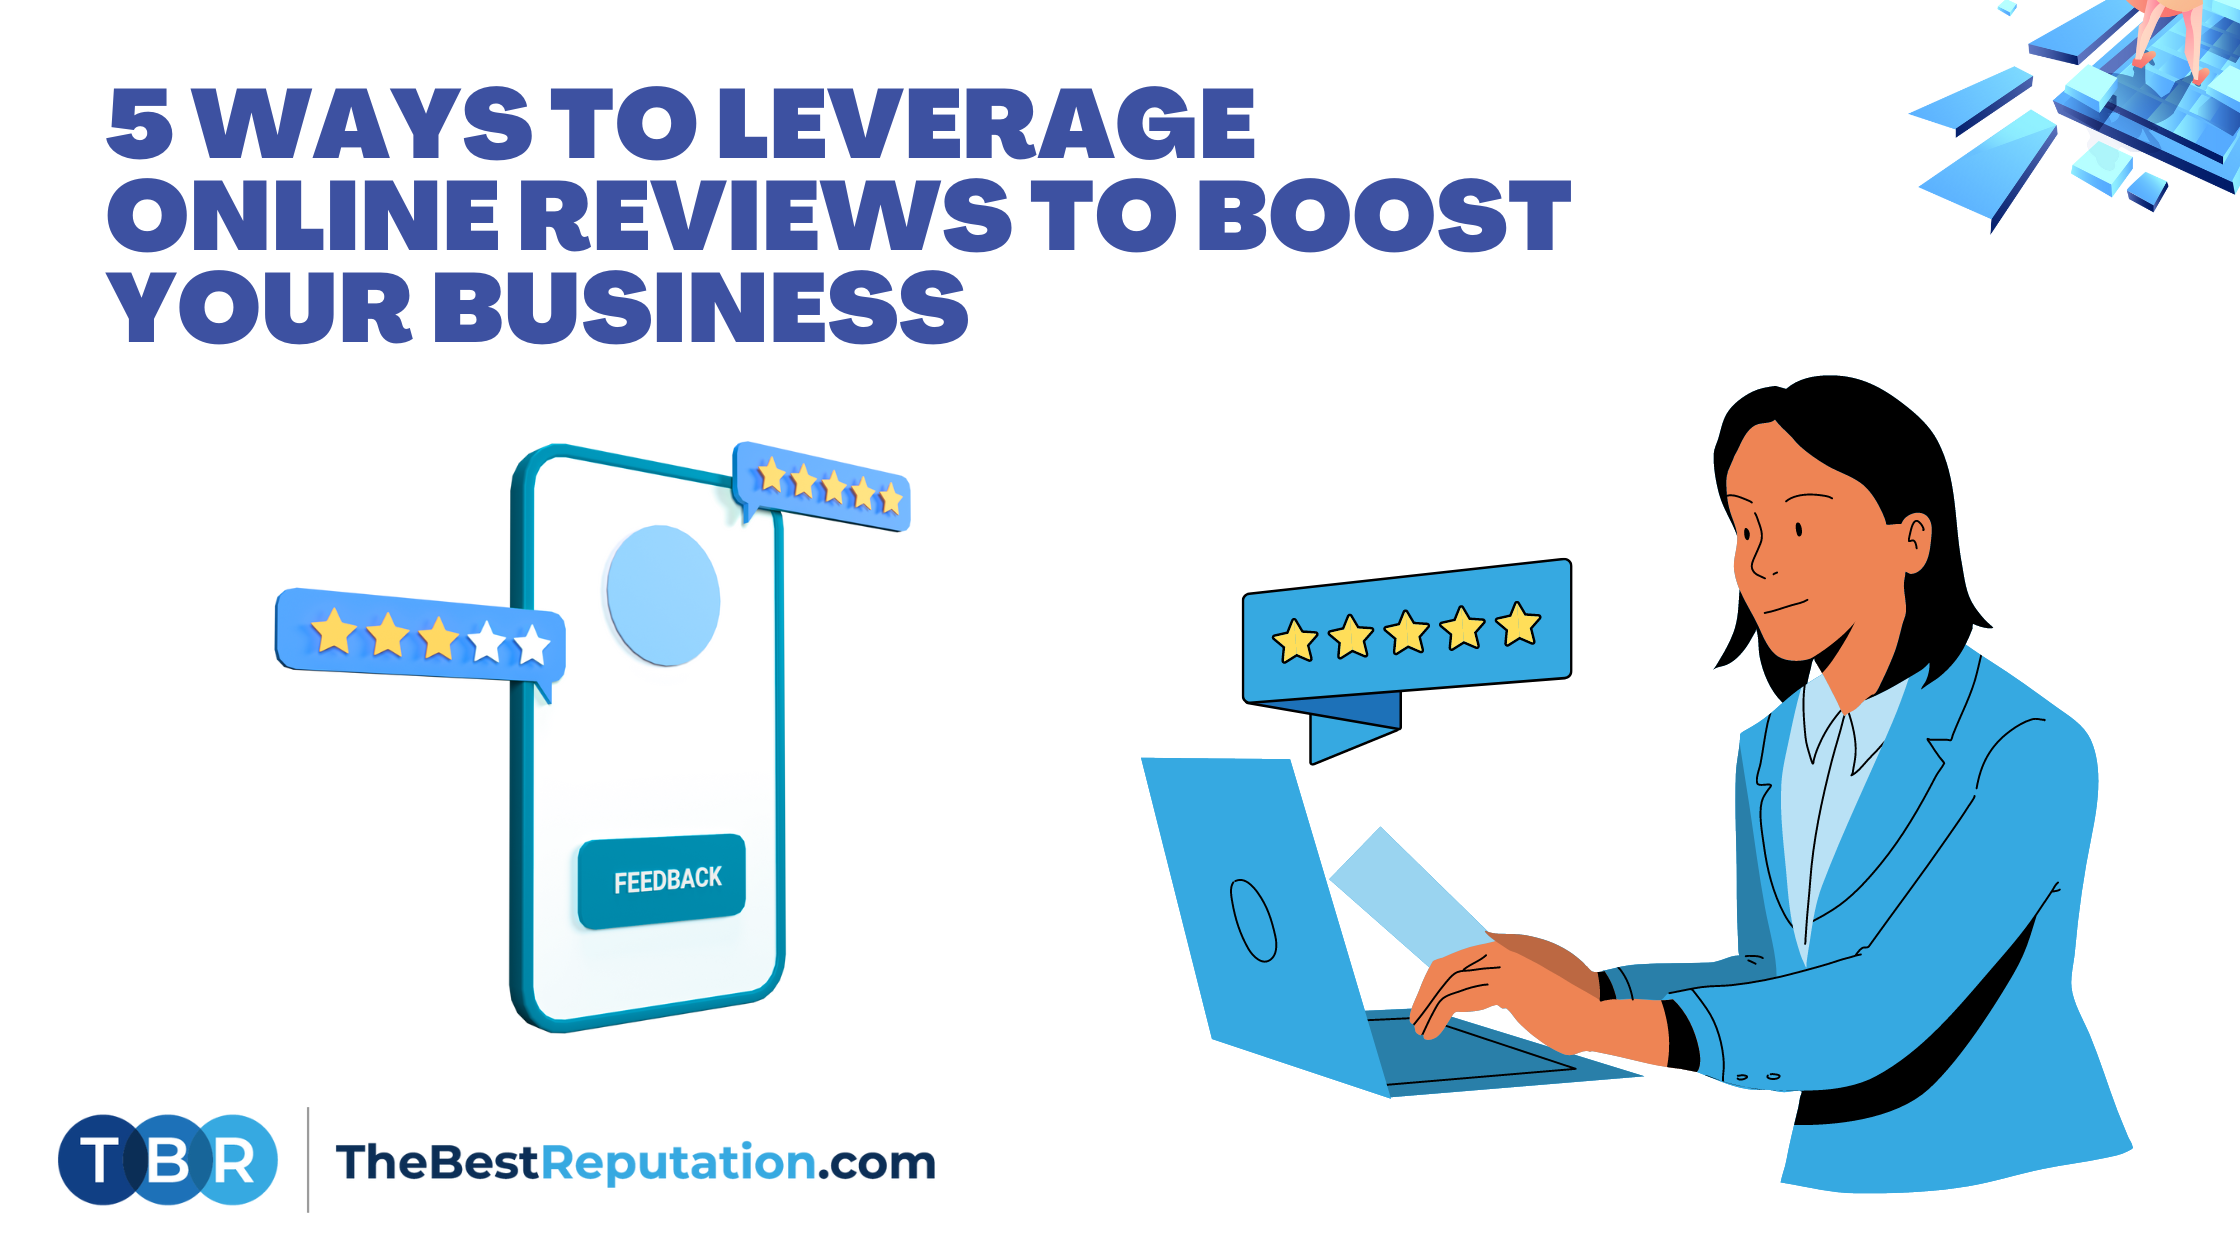 5 Ways to Leverage Online Reviews to Boost Your Business